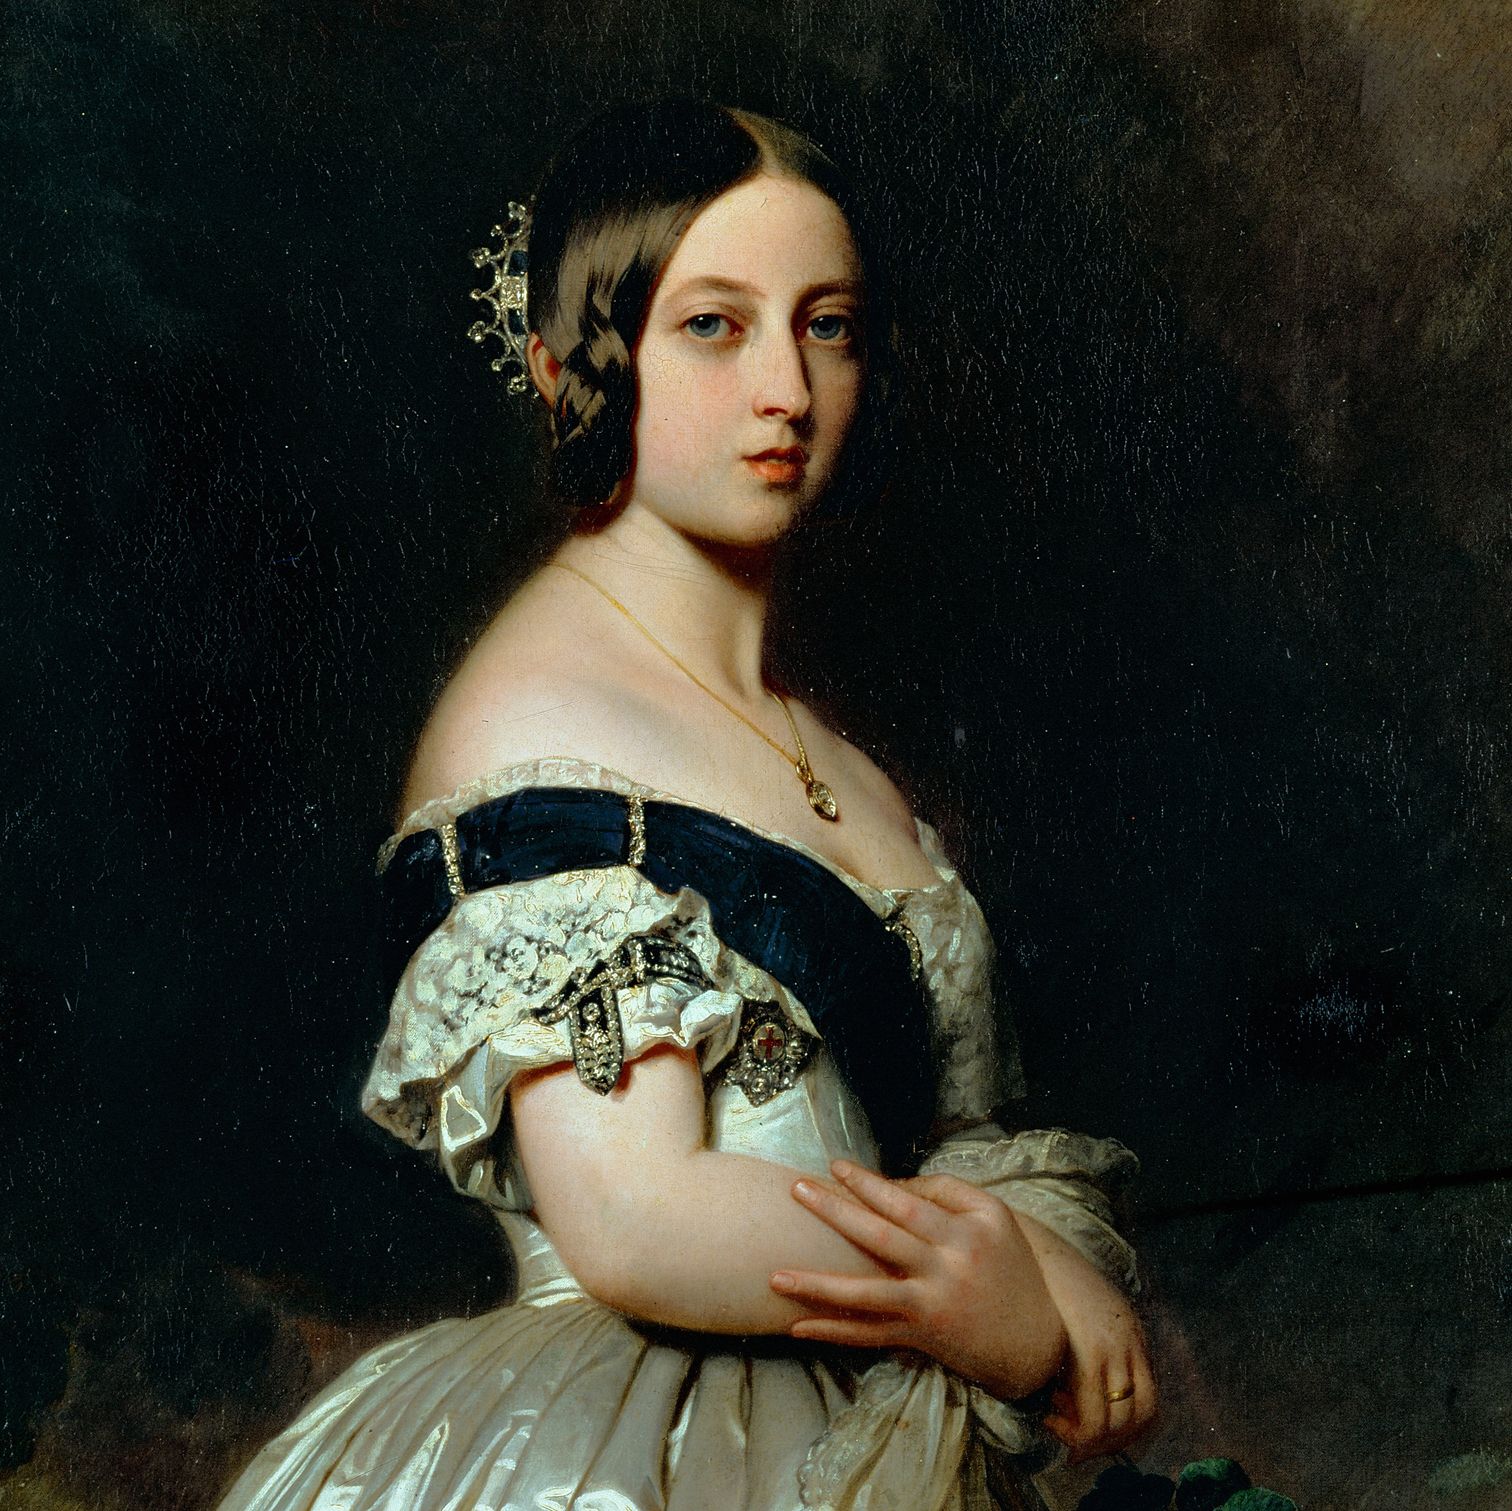 Queen Victoria's Love of Jewels Went With Her to the Grave